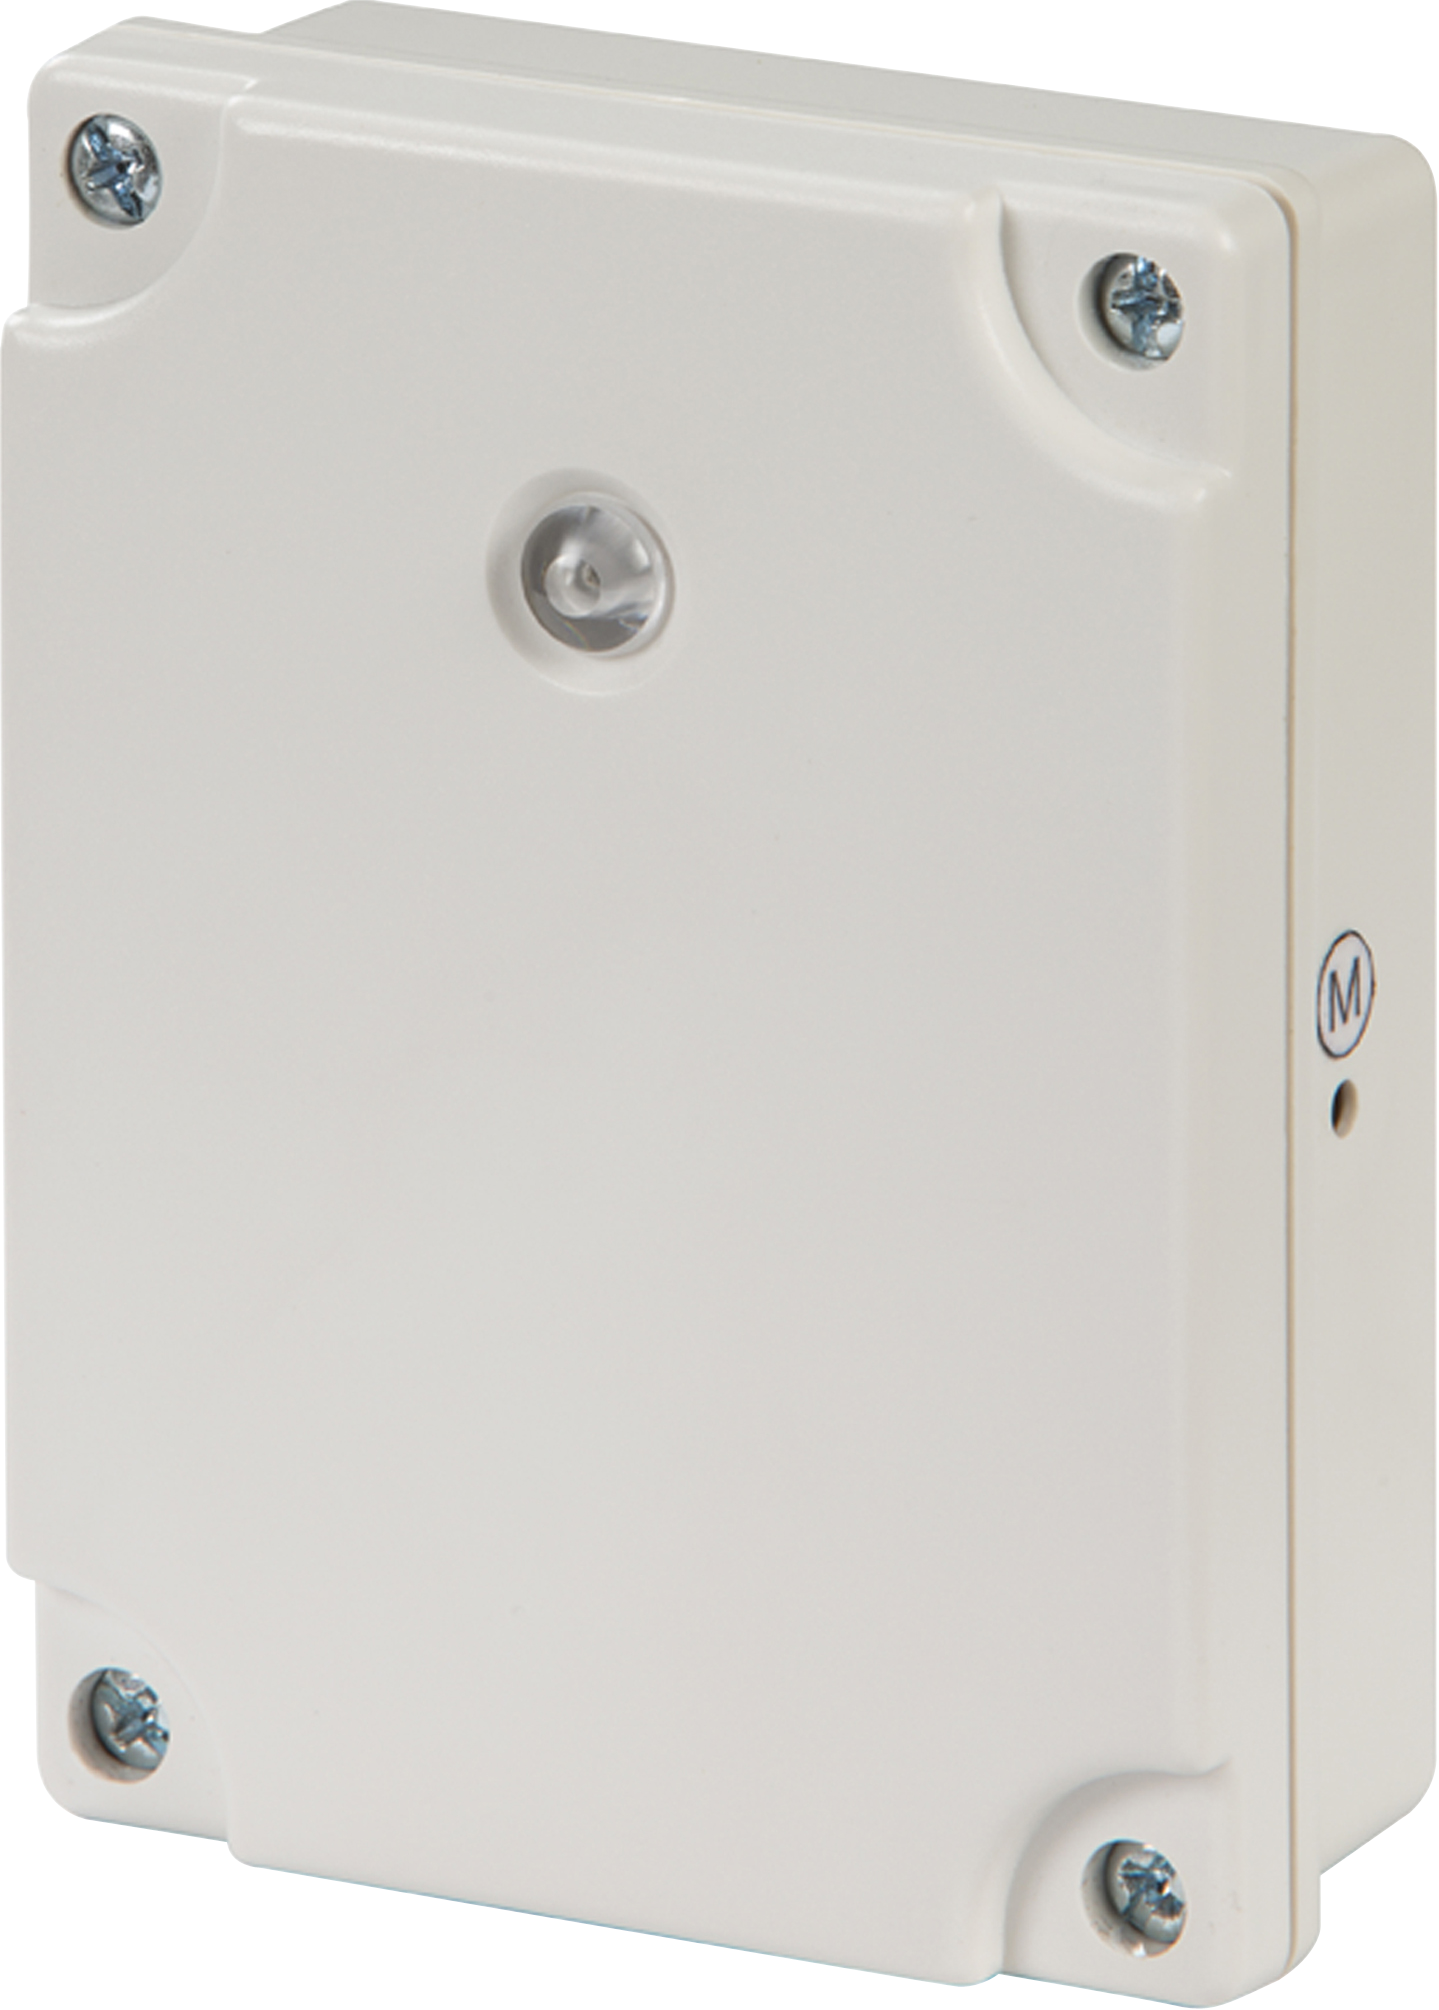 IP55 Photocell Switch - Wall Mountable - OS006 